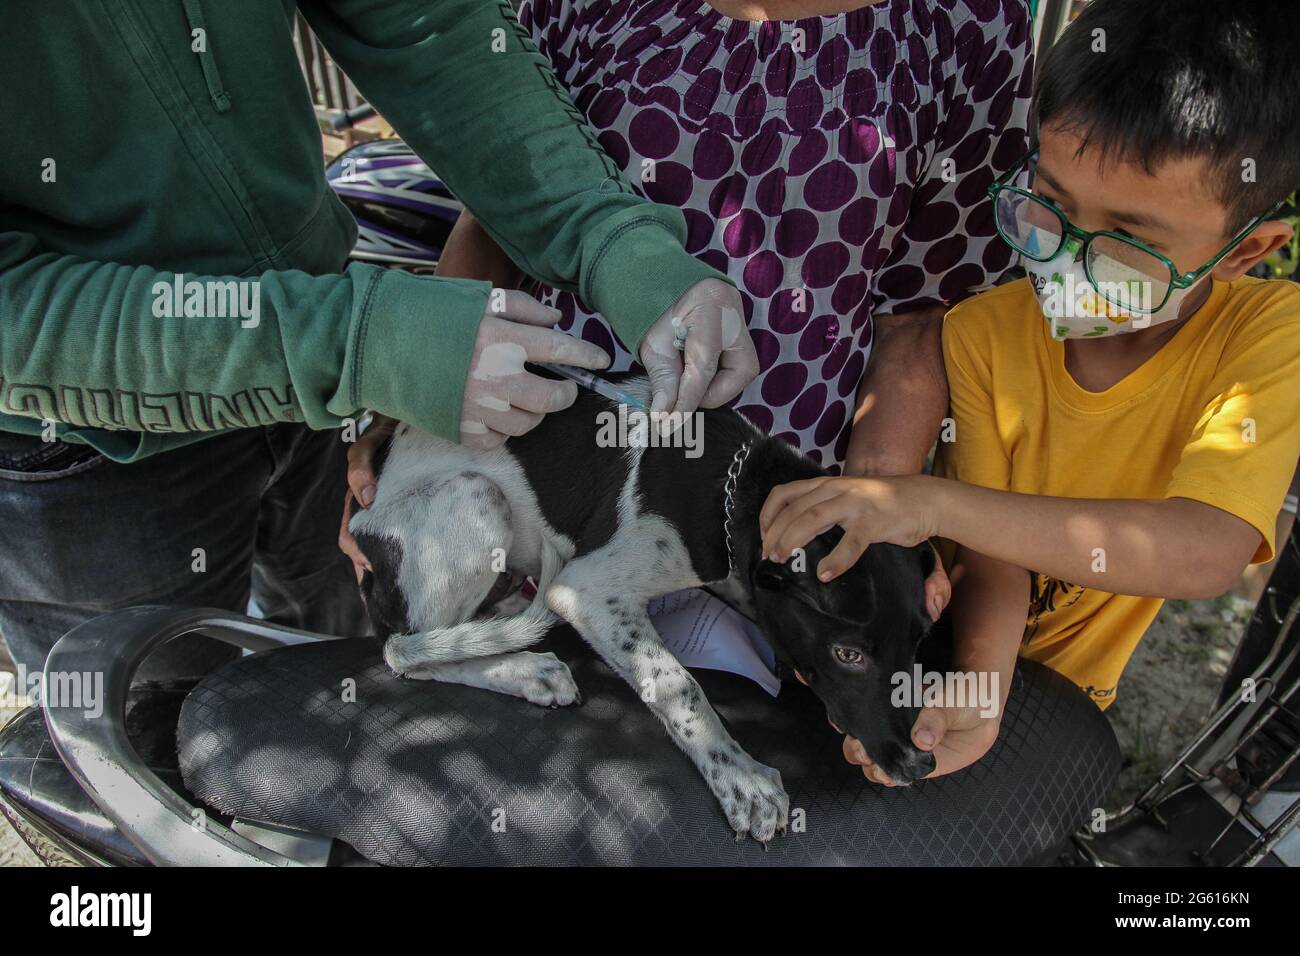 Medan, North Sumatra, Indonesia. 28 June, 2021. A child beside a mother to holding their dog's as Indonesian health workers vaccinate during a mass vaccination of animals with suspected rabies on June 28, 2021 in Medan, Indonesia. The local government from the Medan Health Service proposed the procurement of 1,000 vials of rabies vaccine to avoid further fatalities. Currently, at least 240 pet dogs have been vaccinated against rabies after a ten-year-old boy was found to have died from the bite of a neighbor's dog who was suspected of having rabies on Sunday, June 13. Credit:  Ivan Damanik/Ala Stock Photo